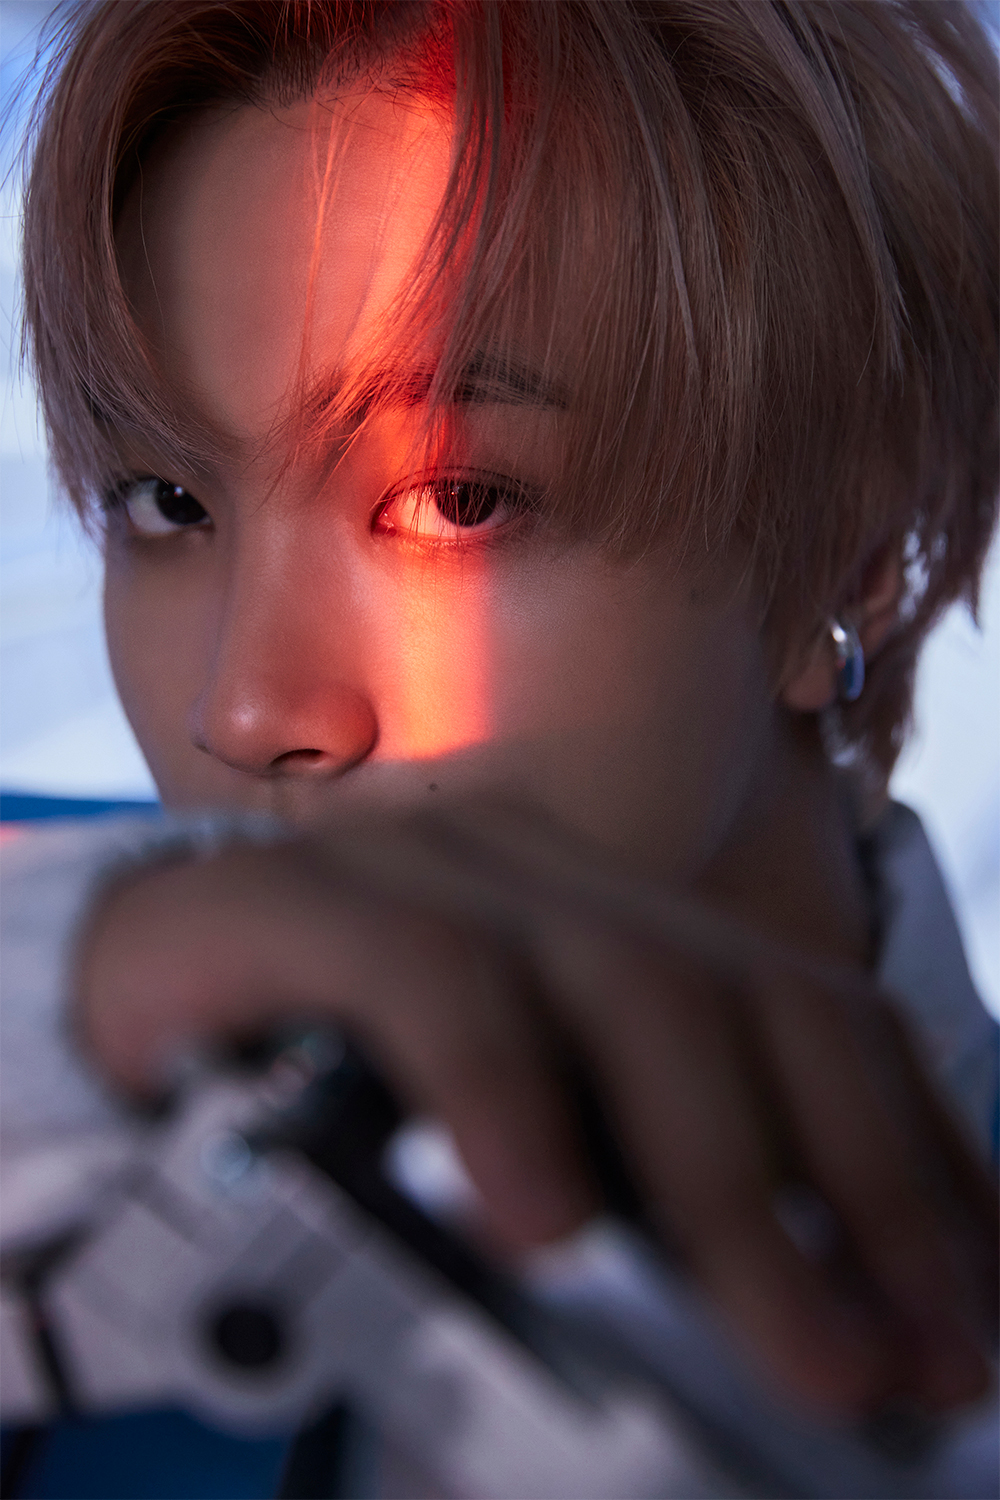 NCT 'Universe' teaser released 'Intense eyes'